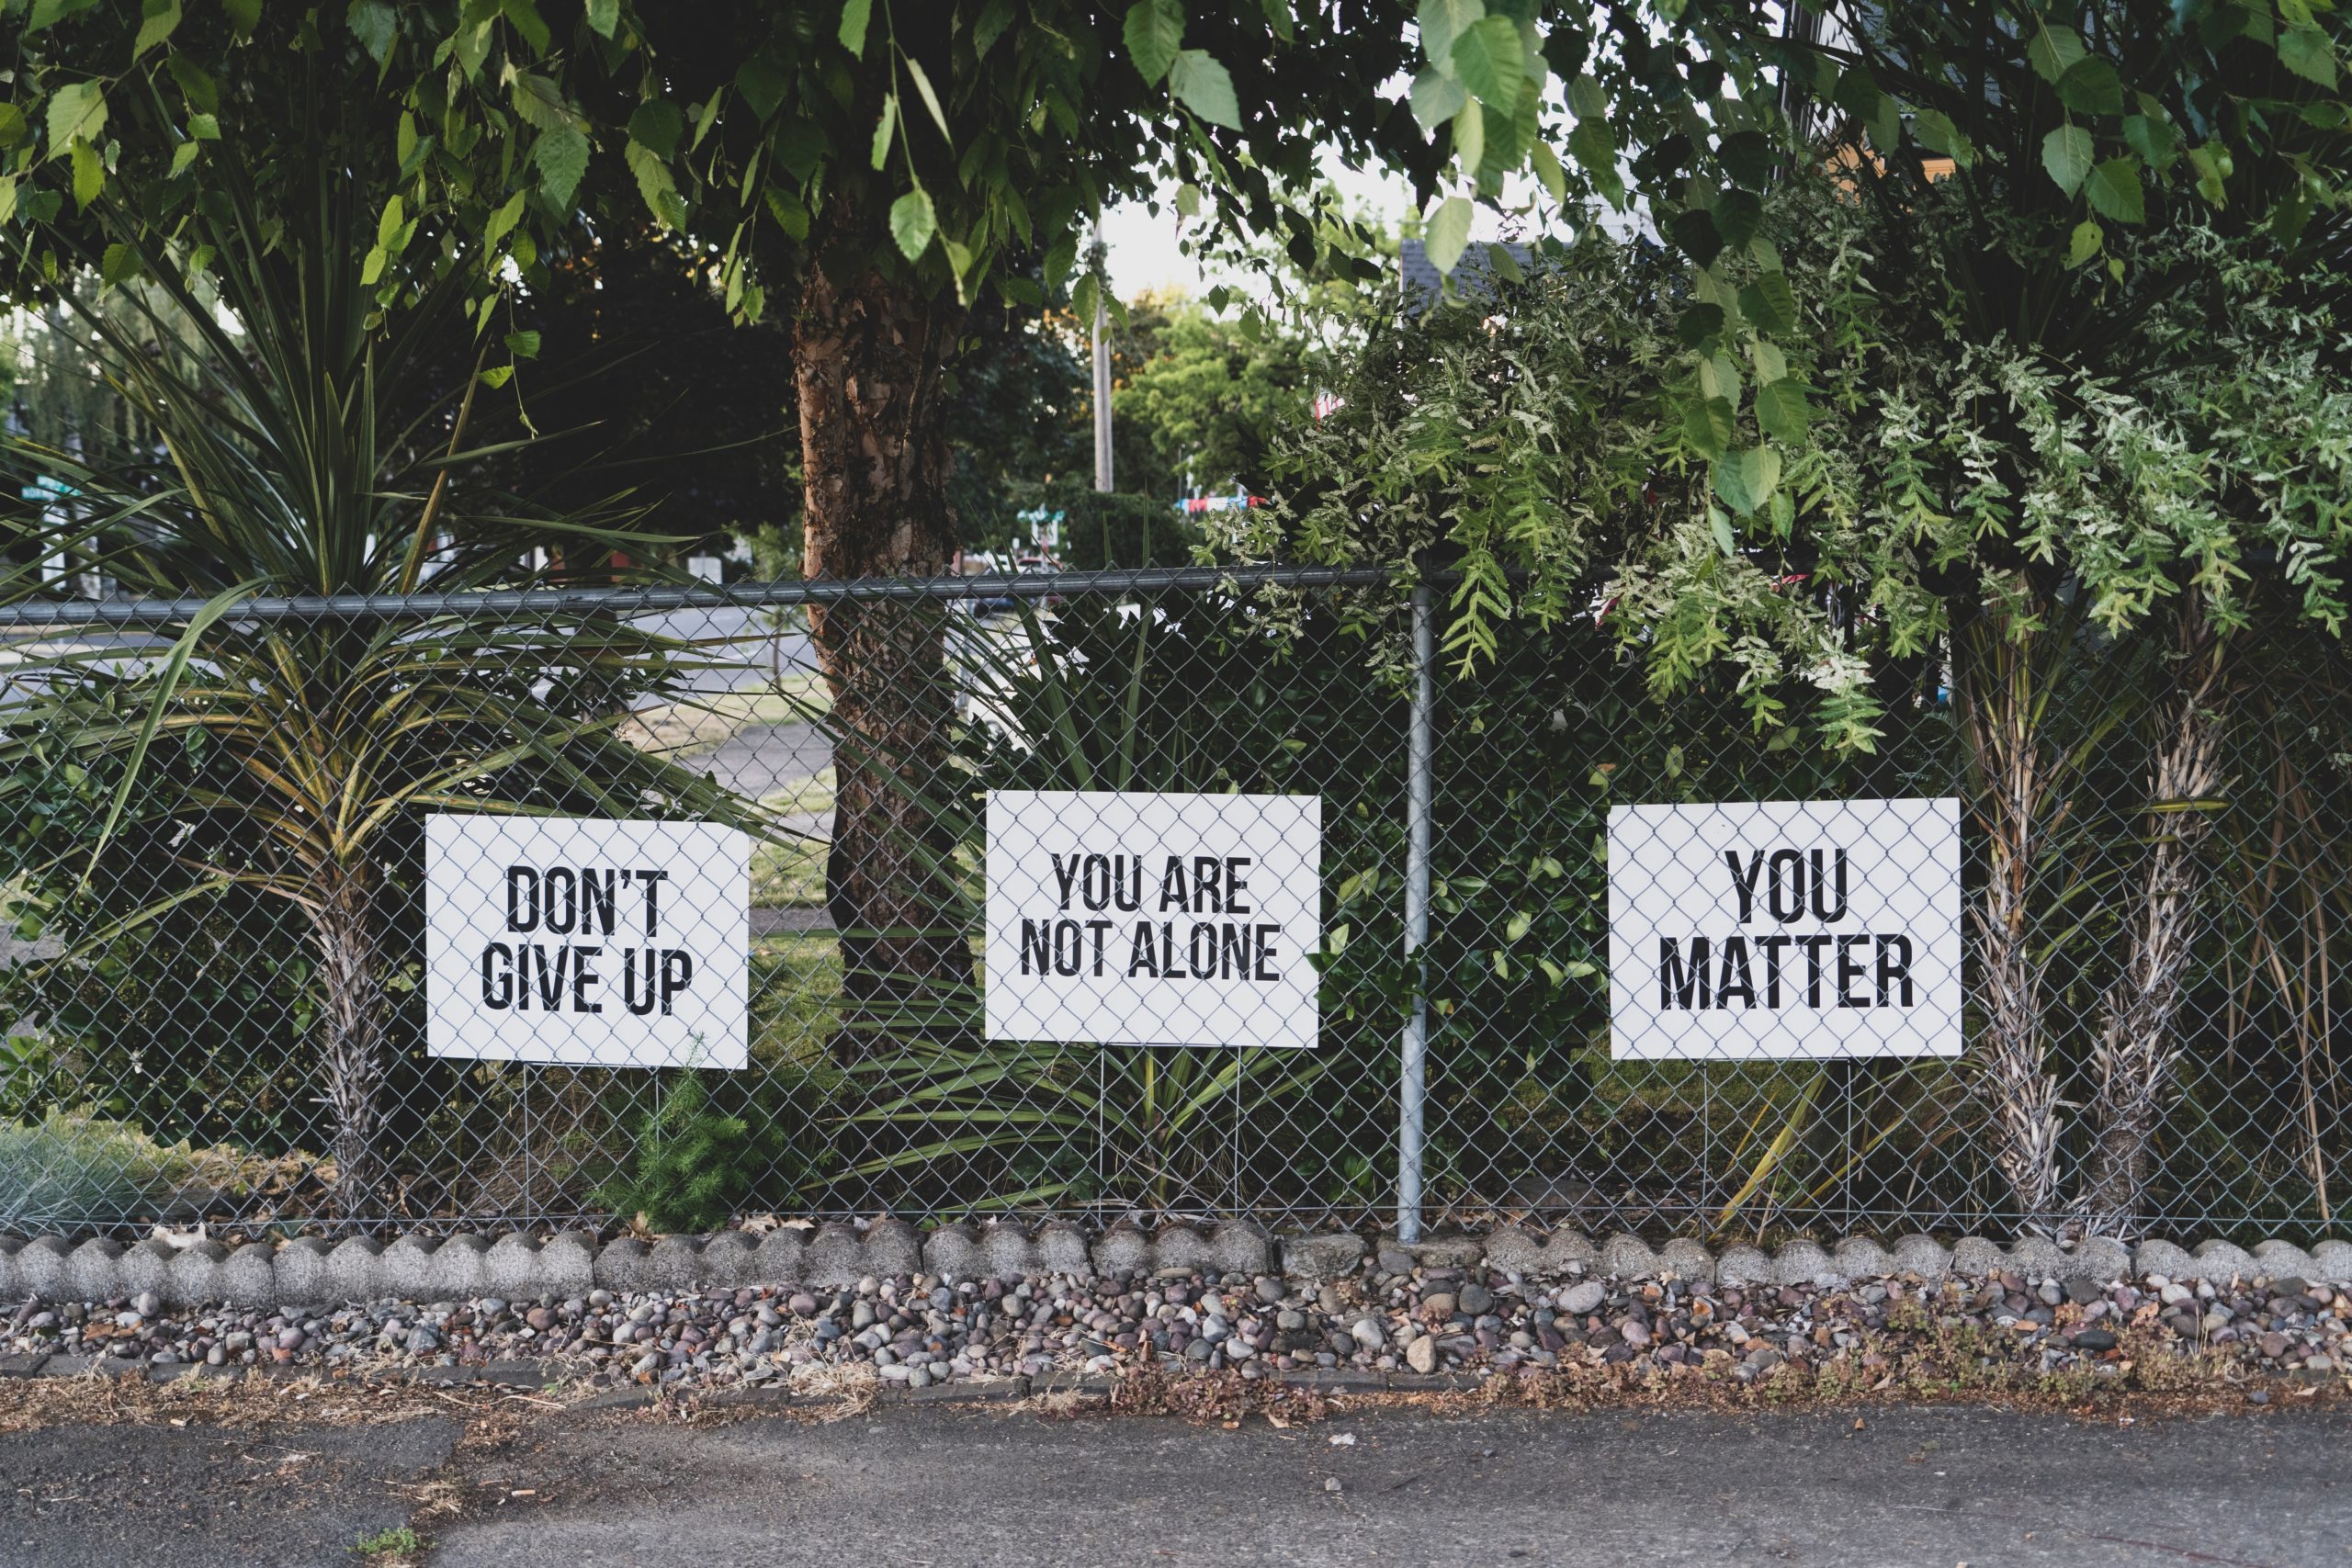 There are three inspirational mental health signs attached to a fence. They read: "Don't give up," "You are not alone," and "You matter."